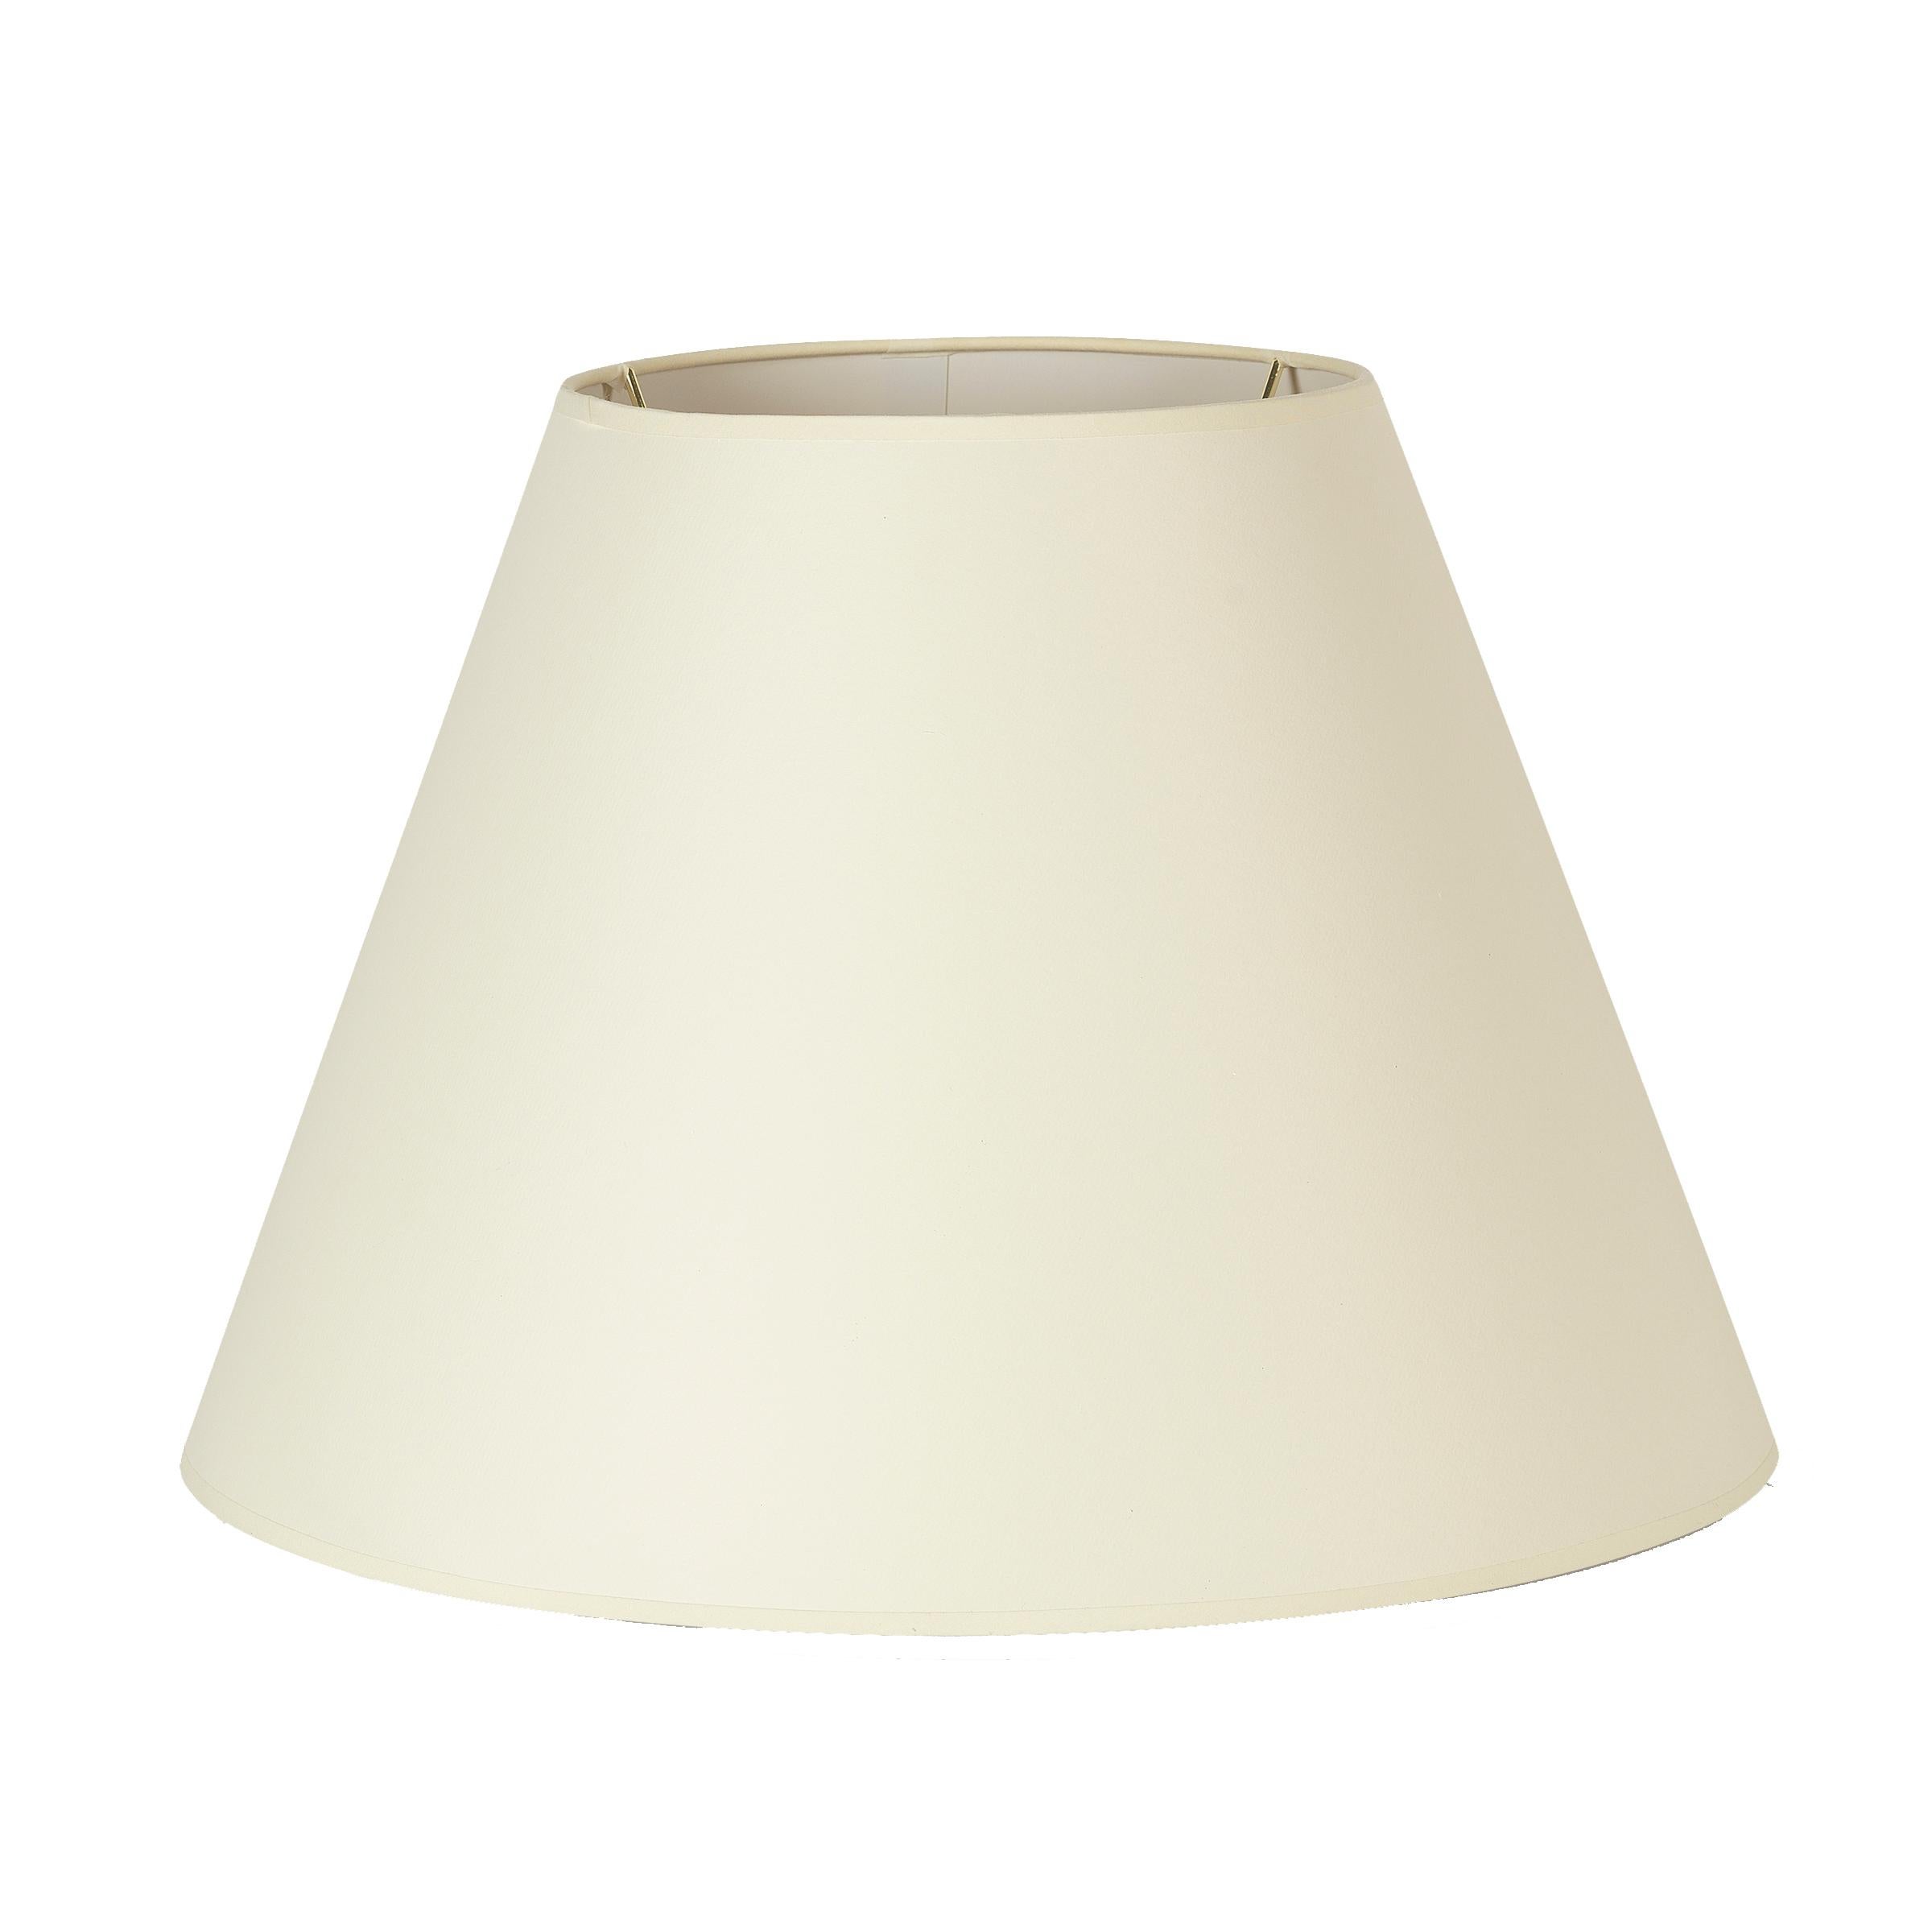 A classic off-white paper shade that enhances and adds to whichever lamp it tops. Available in three sizes and designed to fit each of the Bunny Williams Home lamps. 